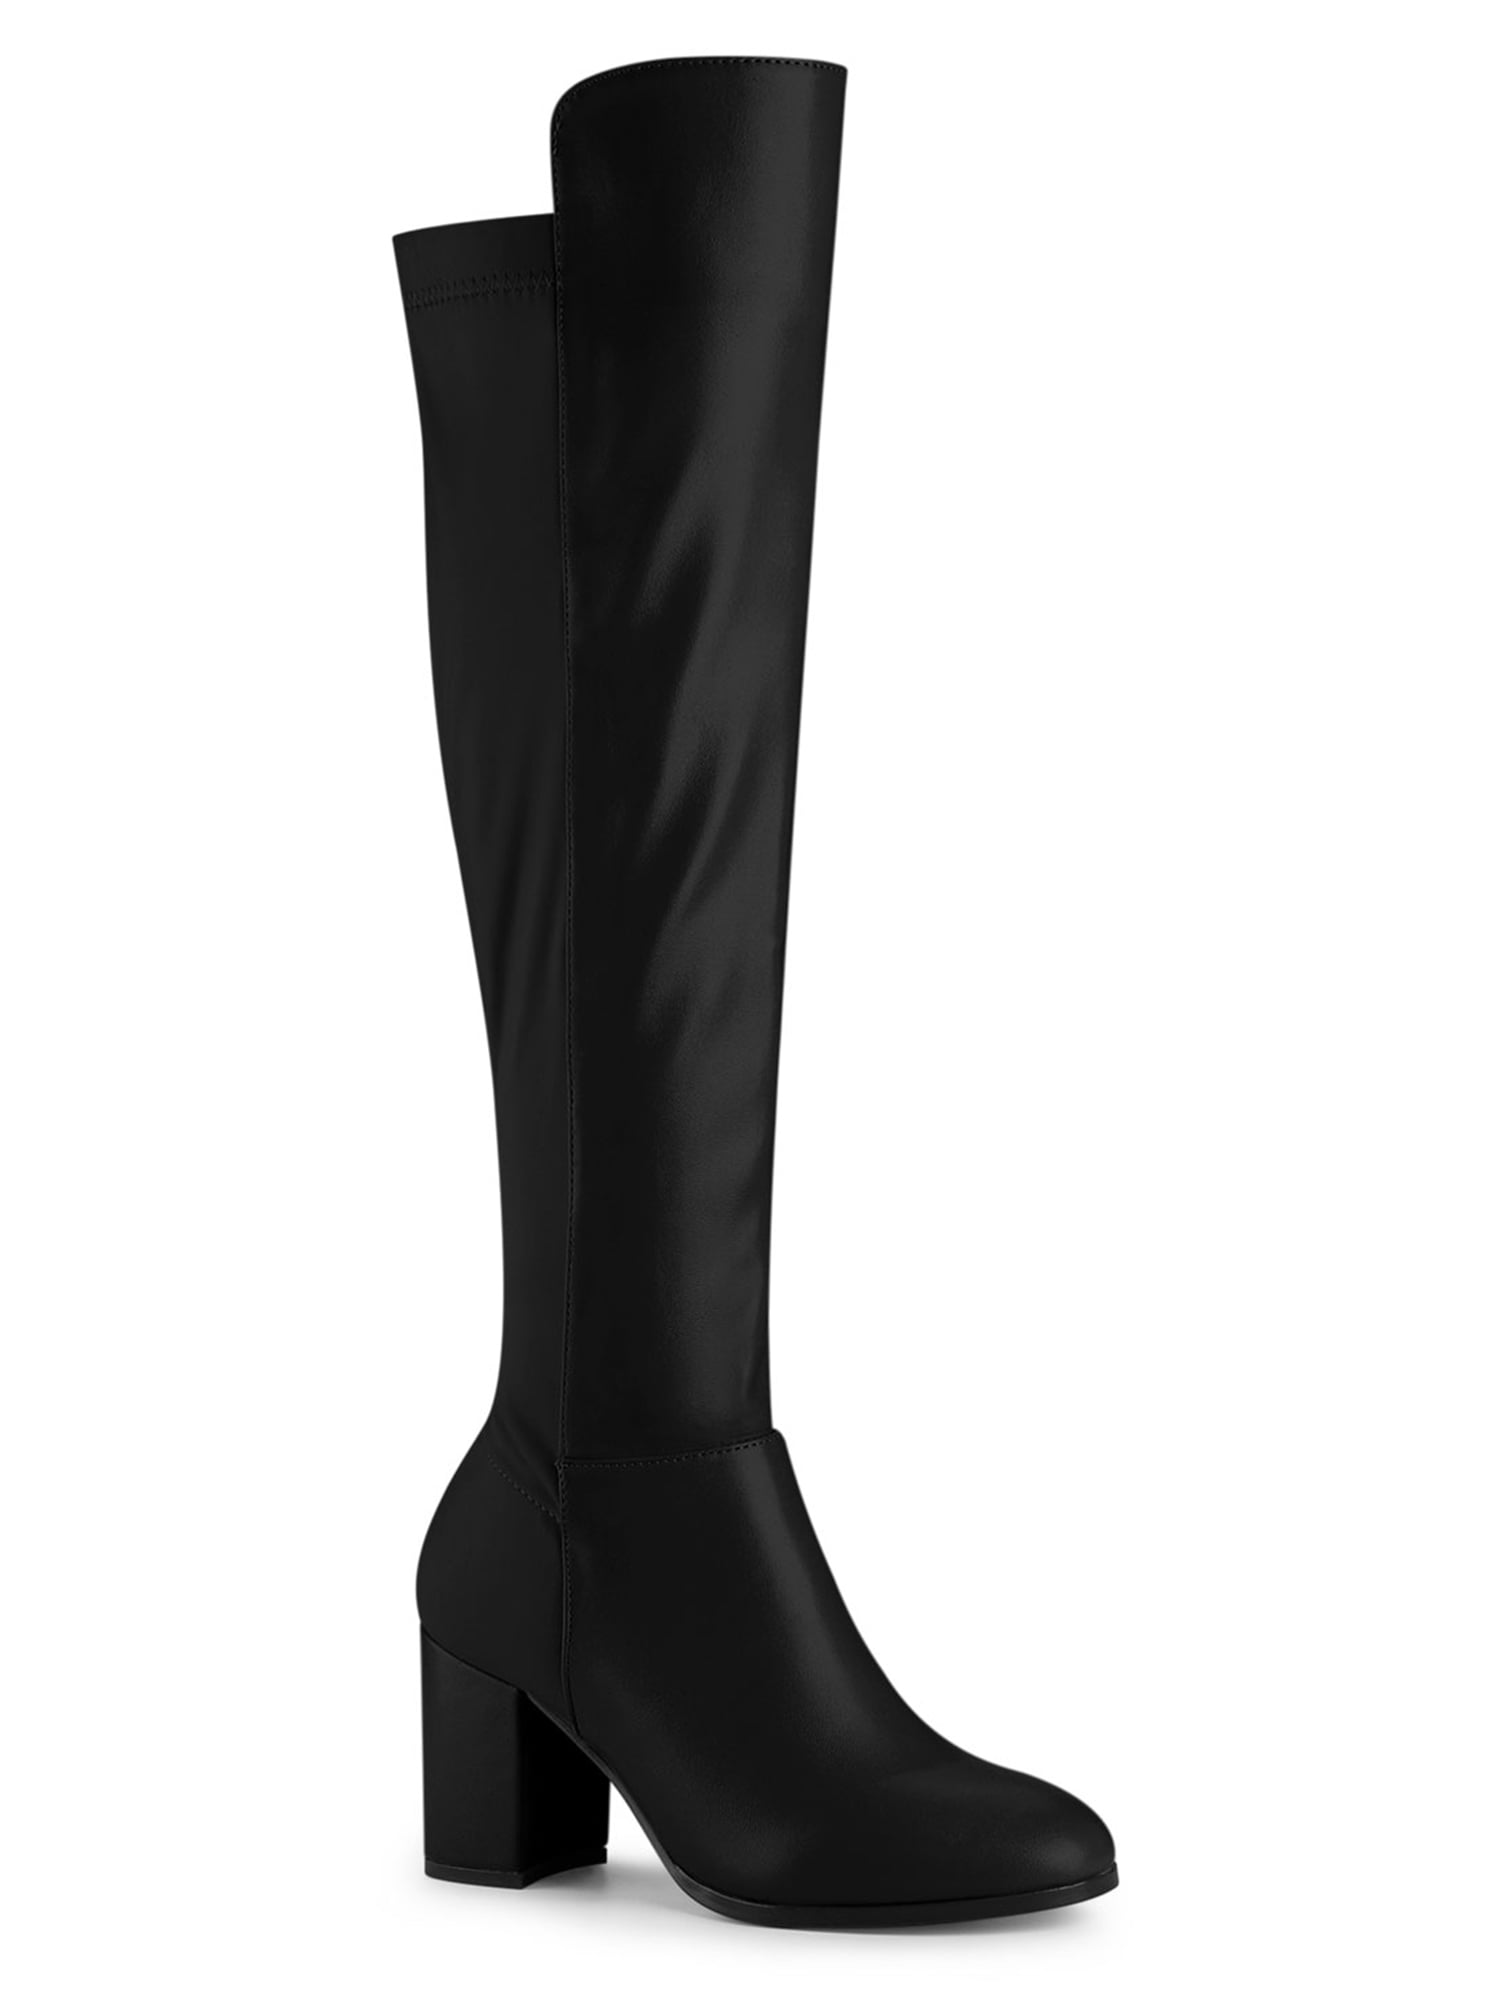 Details about   New European and American denim over knee boots fashion chunky heels high heels